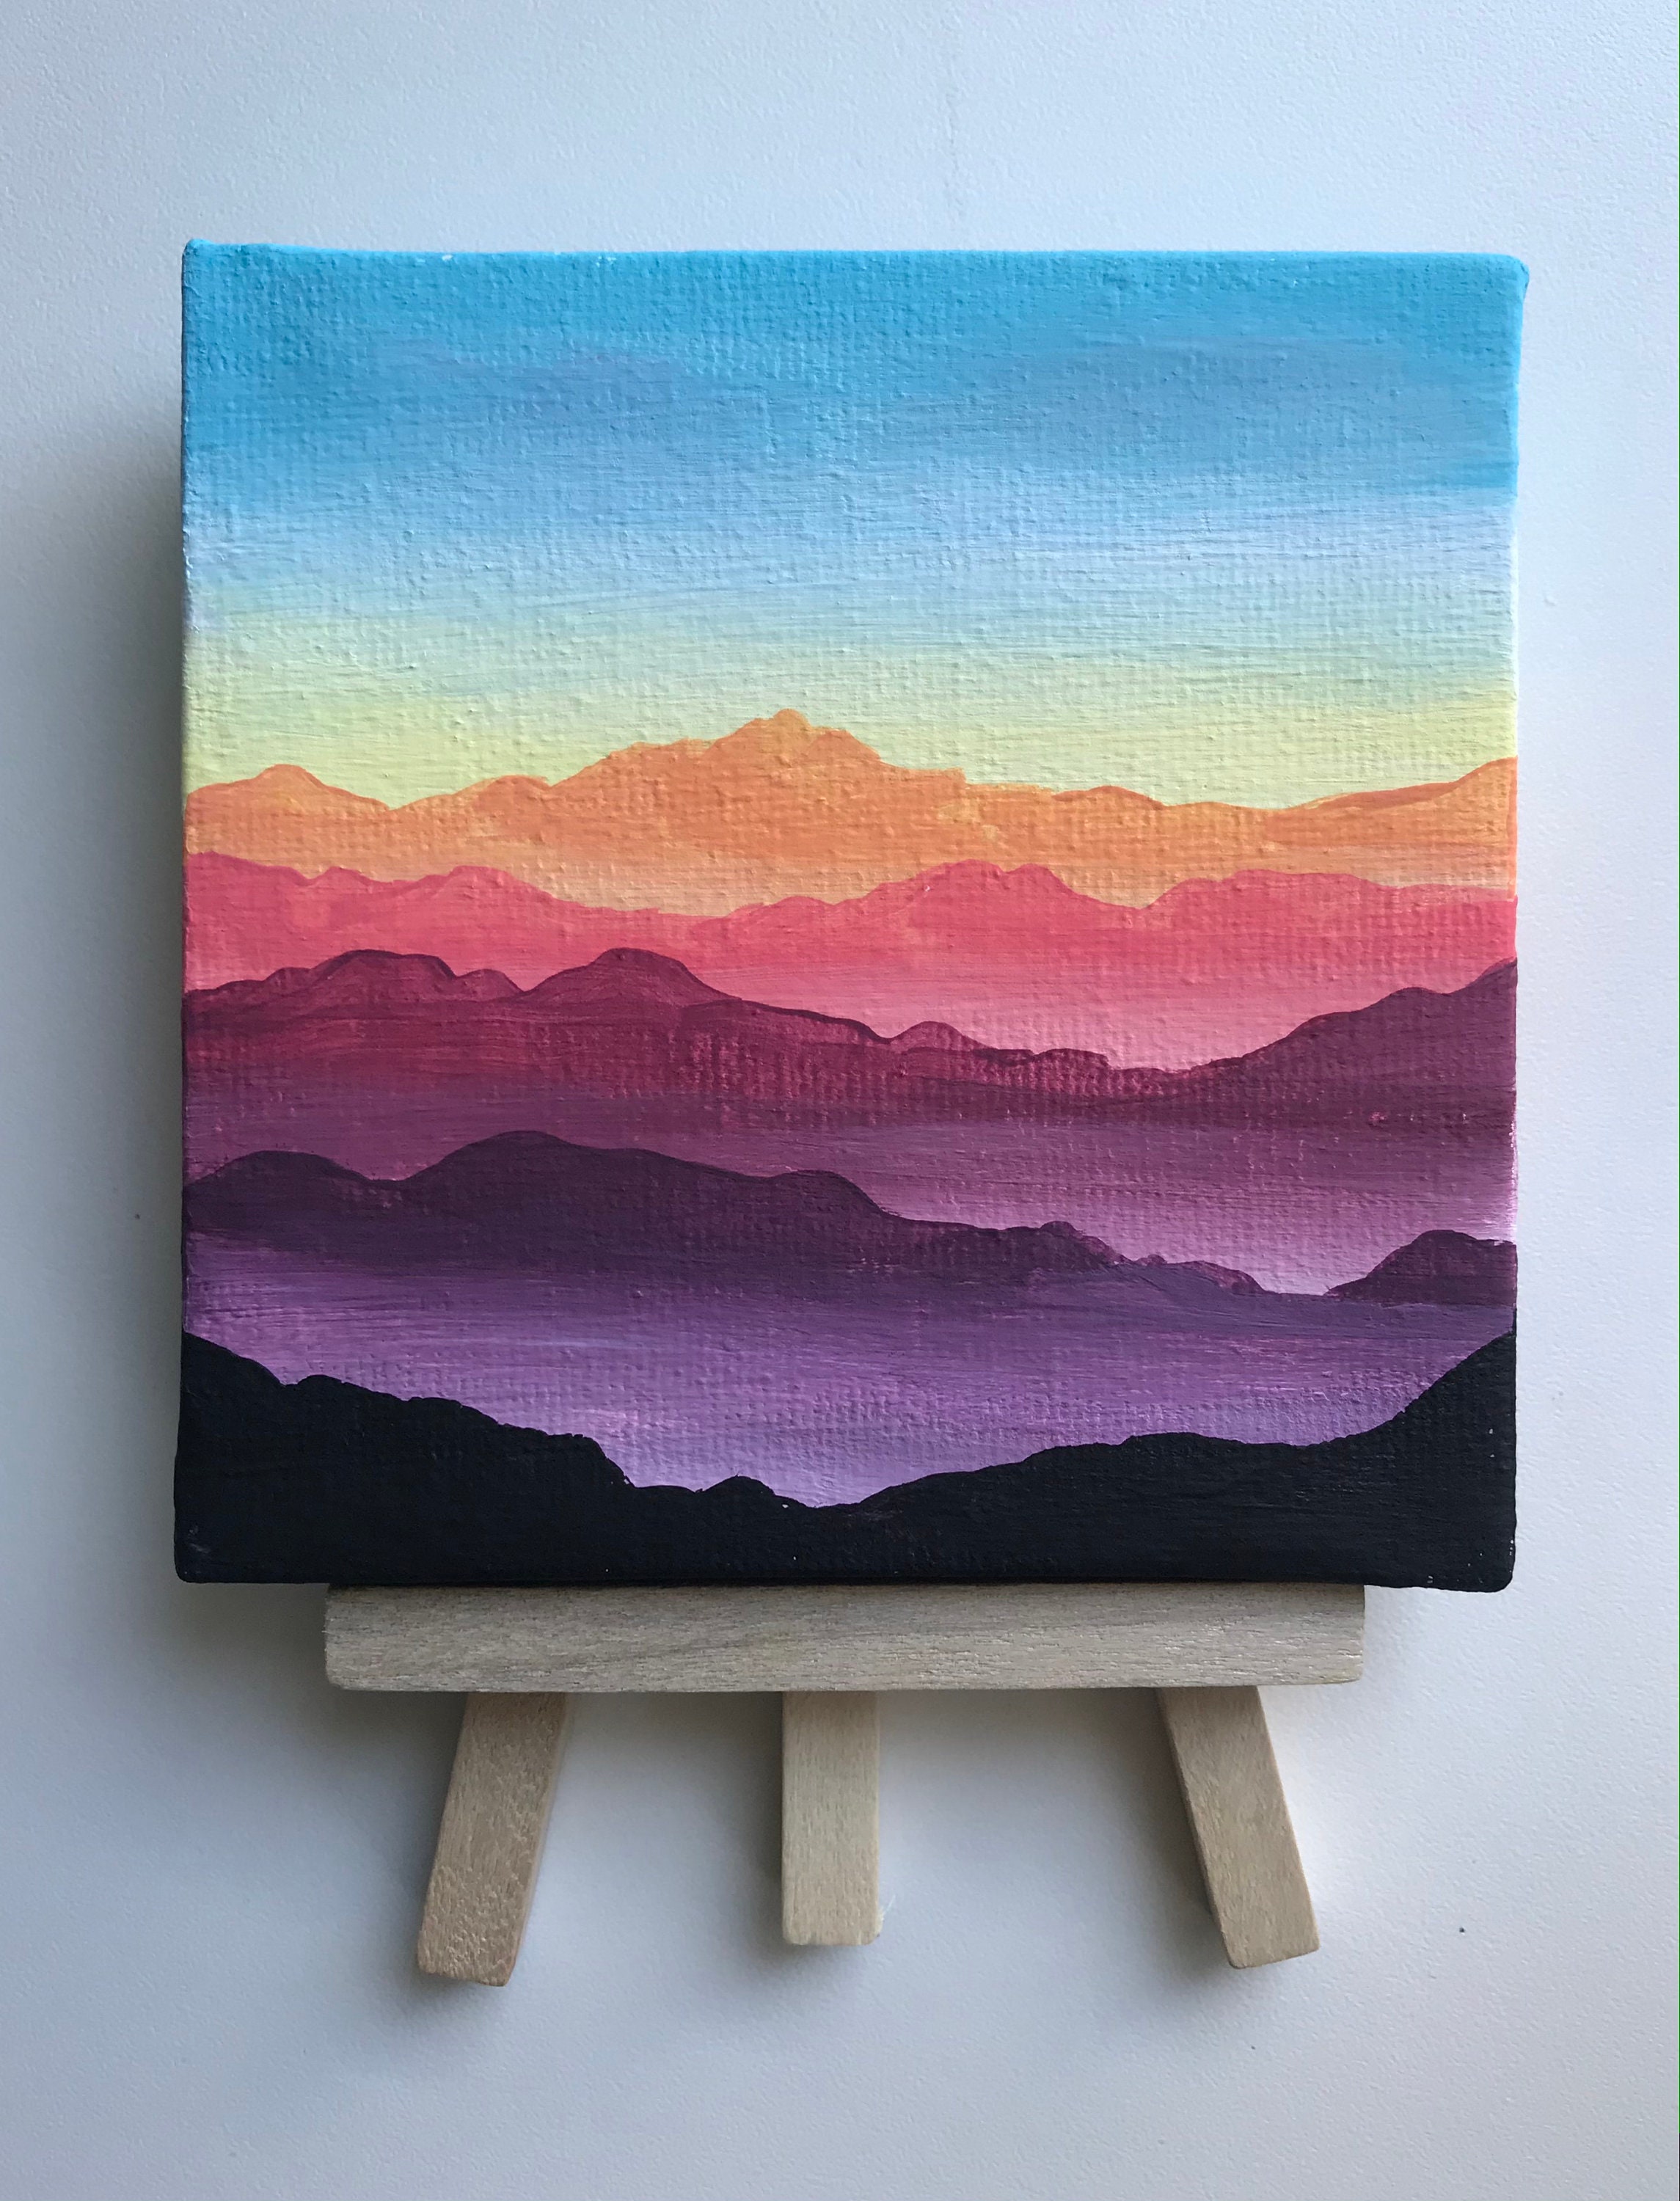 Mini Mountain Sunrise Painting on Canvas with Easel